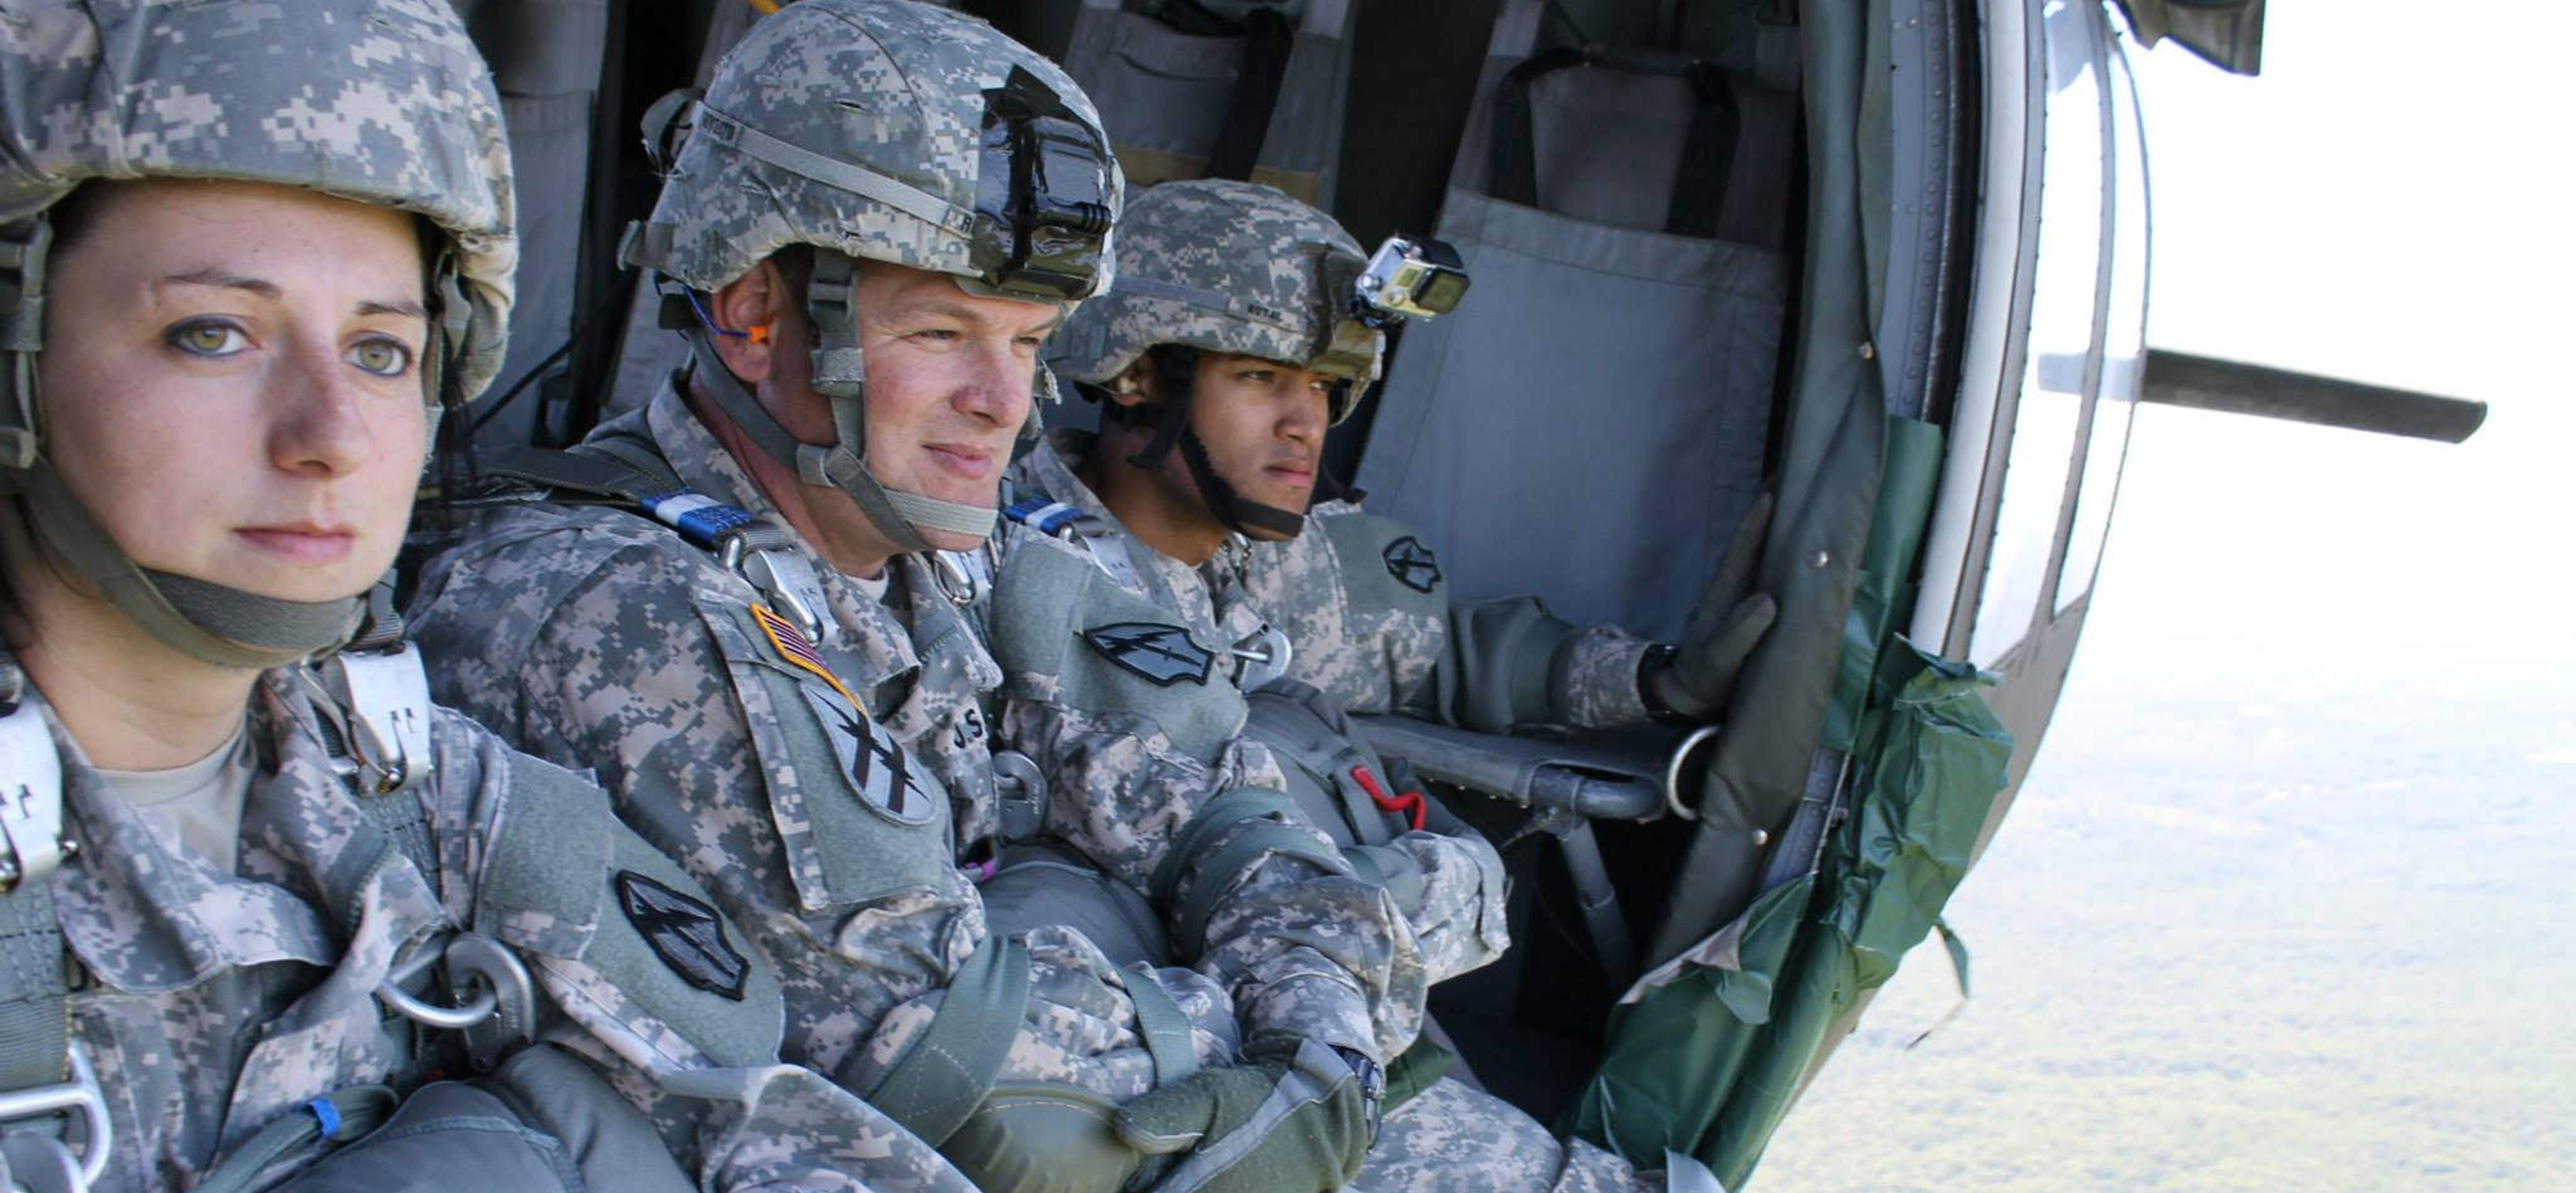 Military members in aircraft